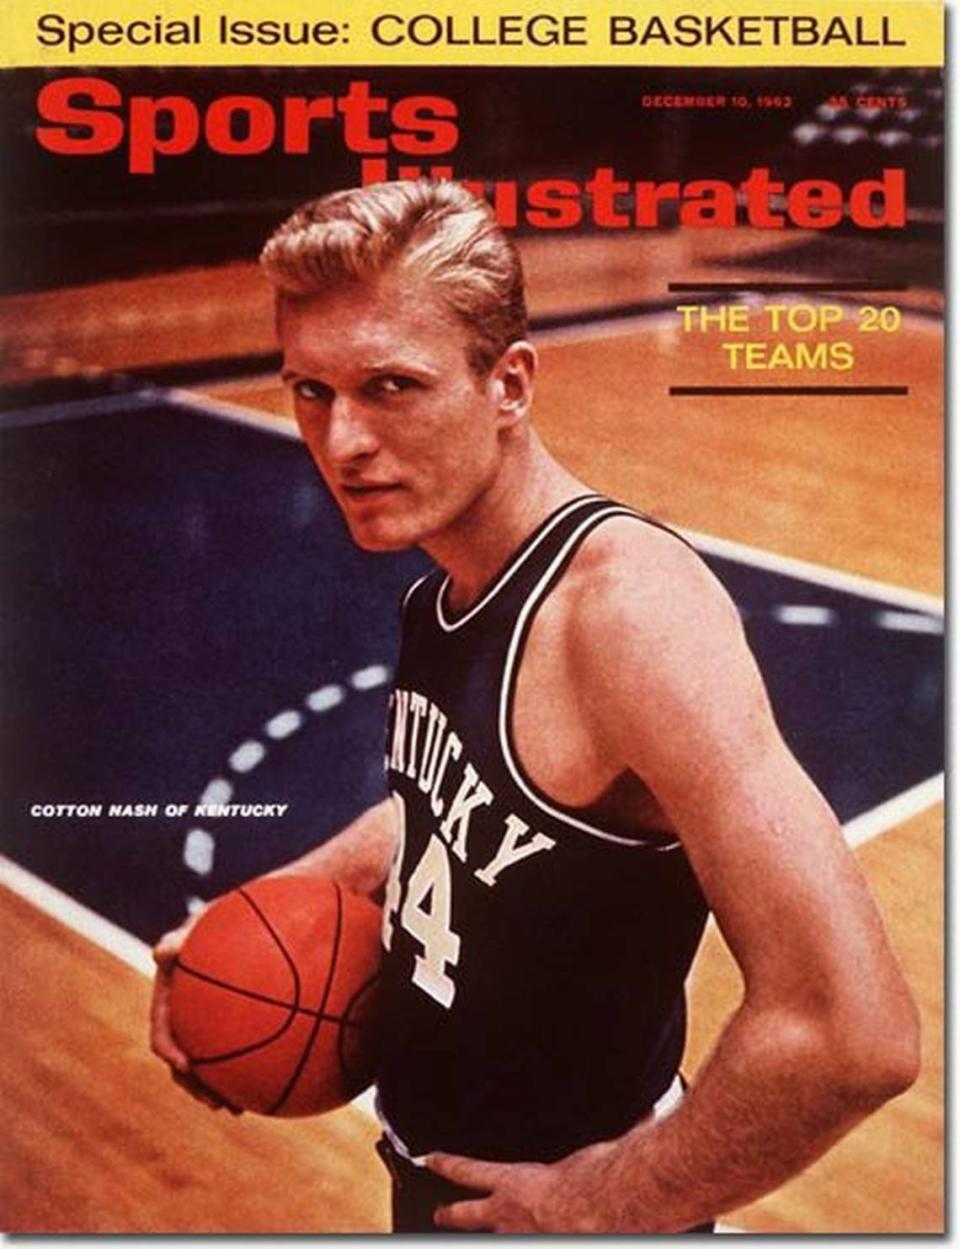 Kentucky star Cotton Nash made the cover of Sports Illustrated on Dec. 10, 1962.